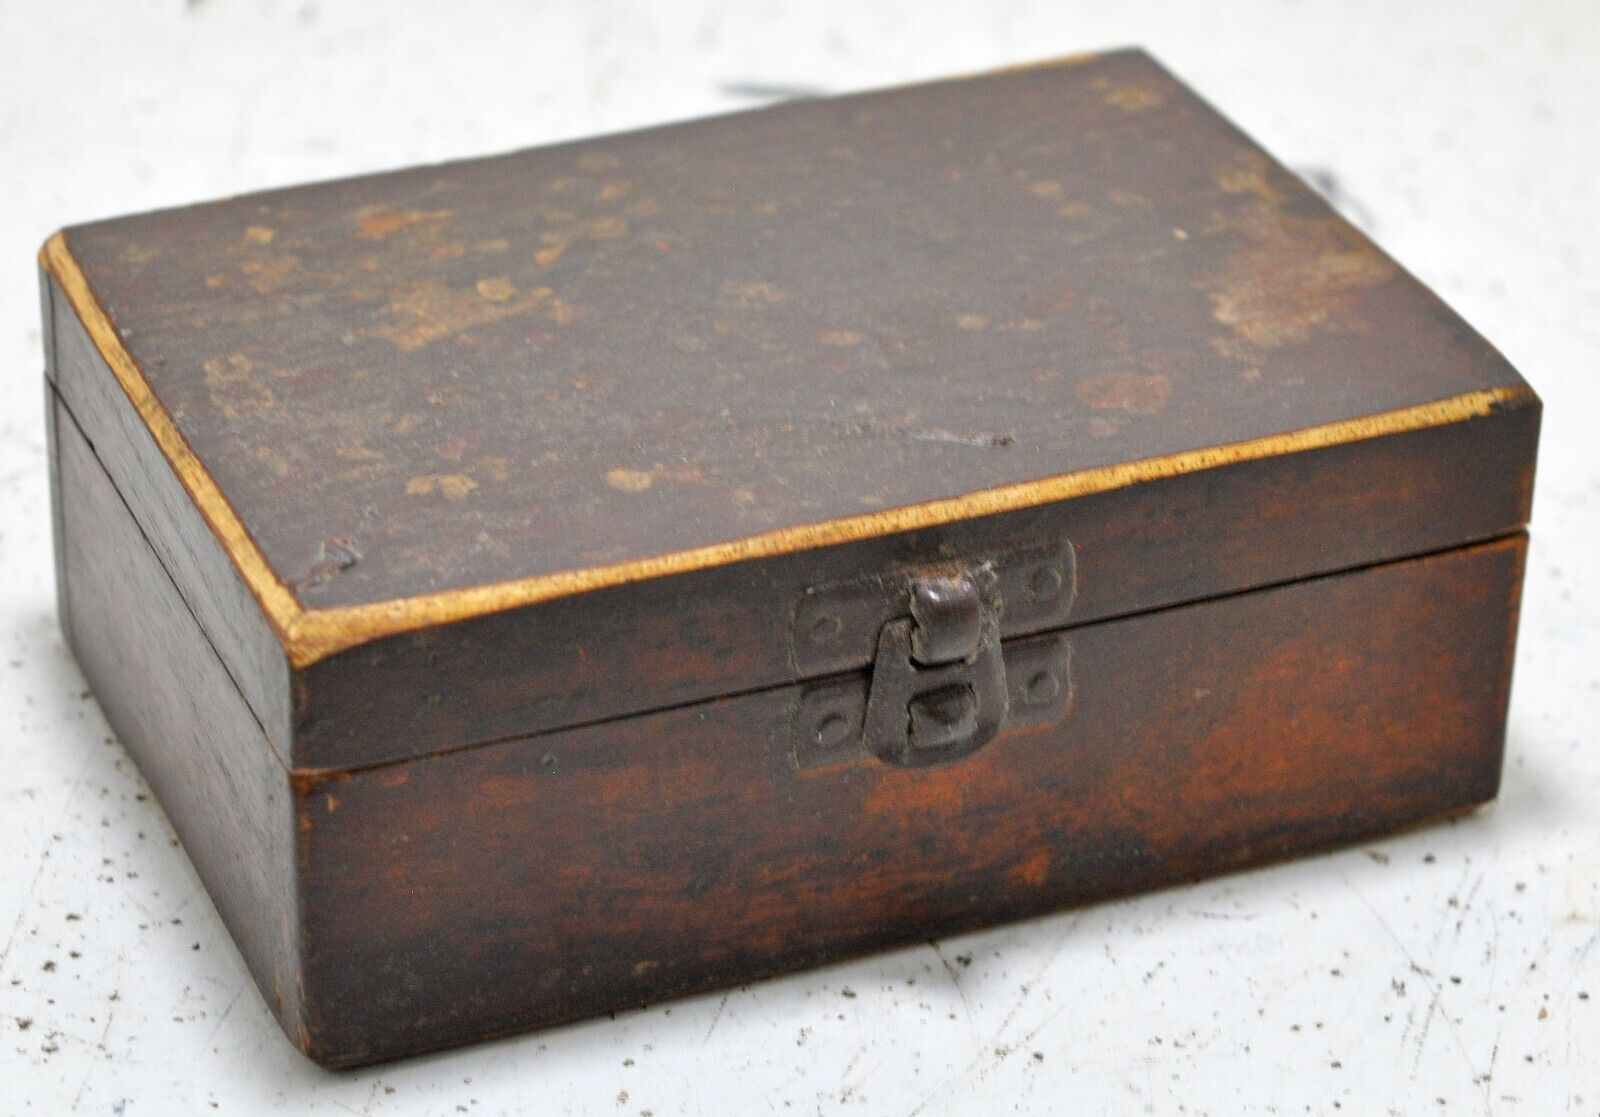 Vintage Wooden Jewellery Maker's Weights Box Original Old Hand Crafted